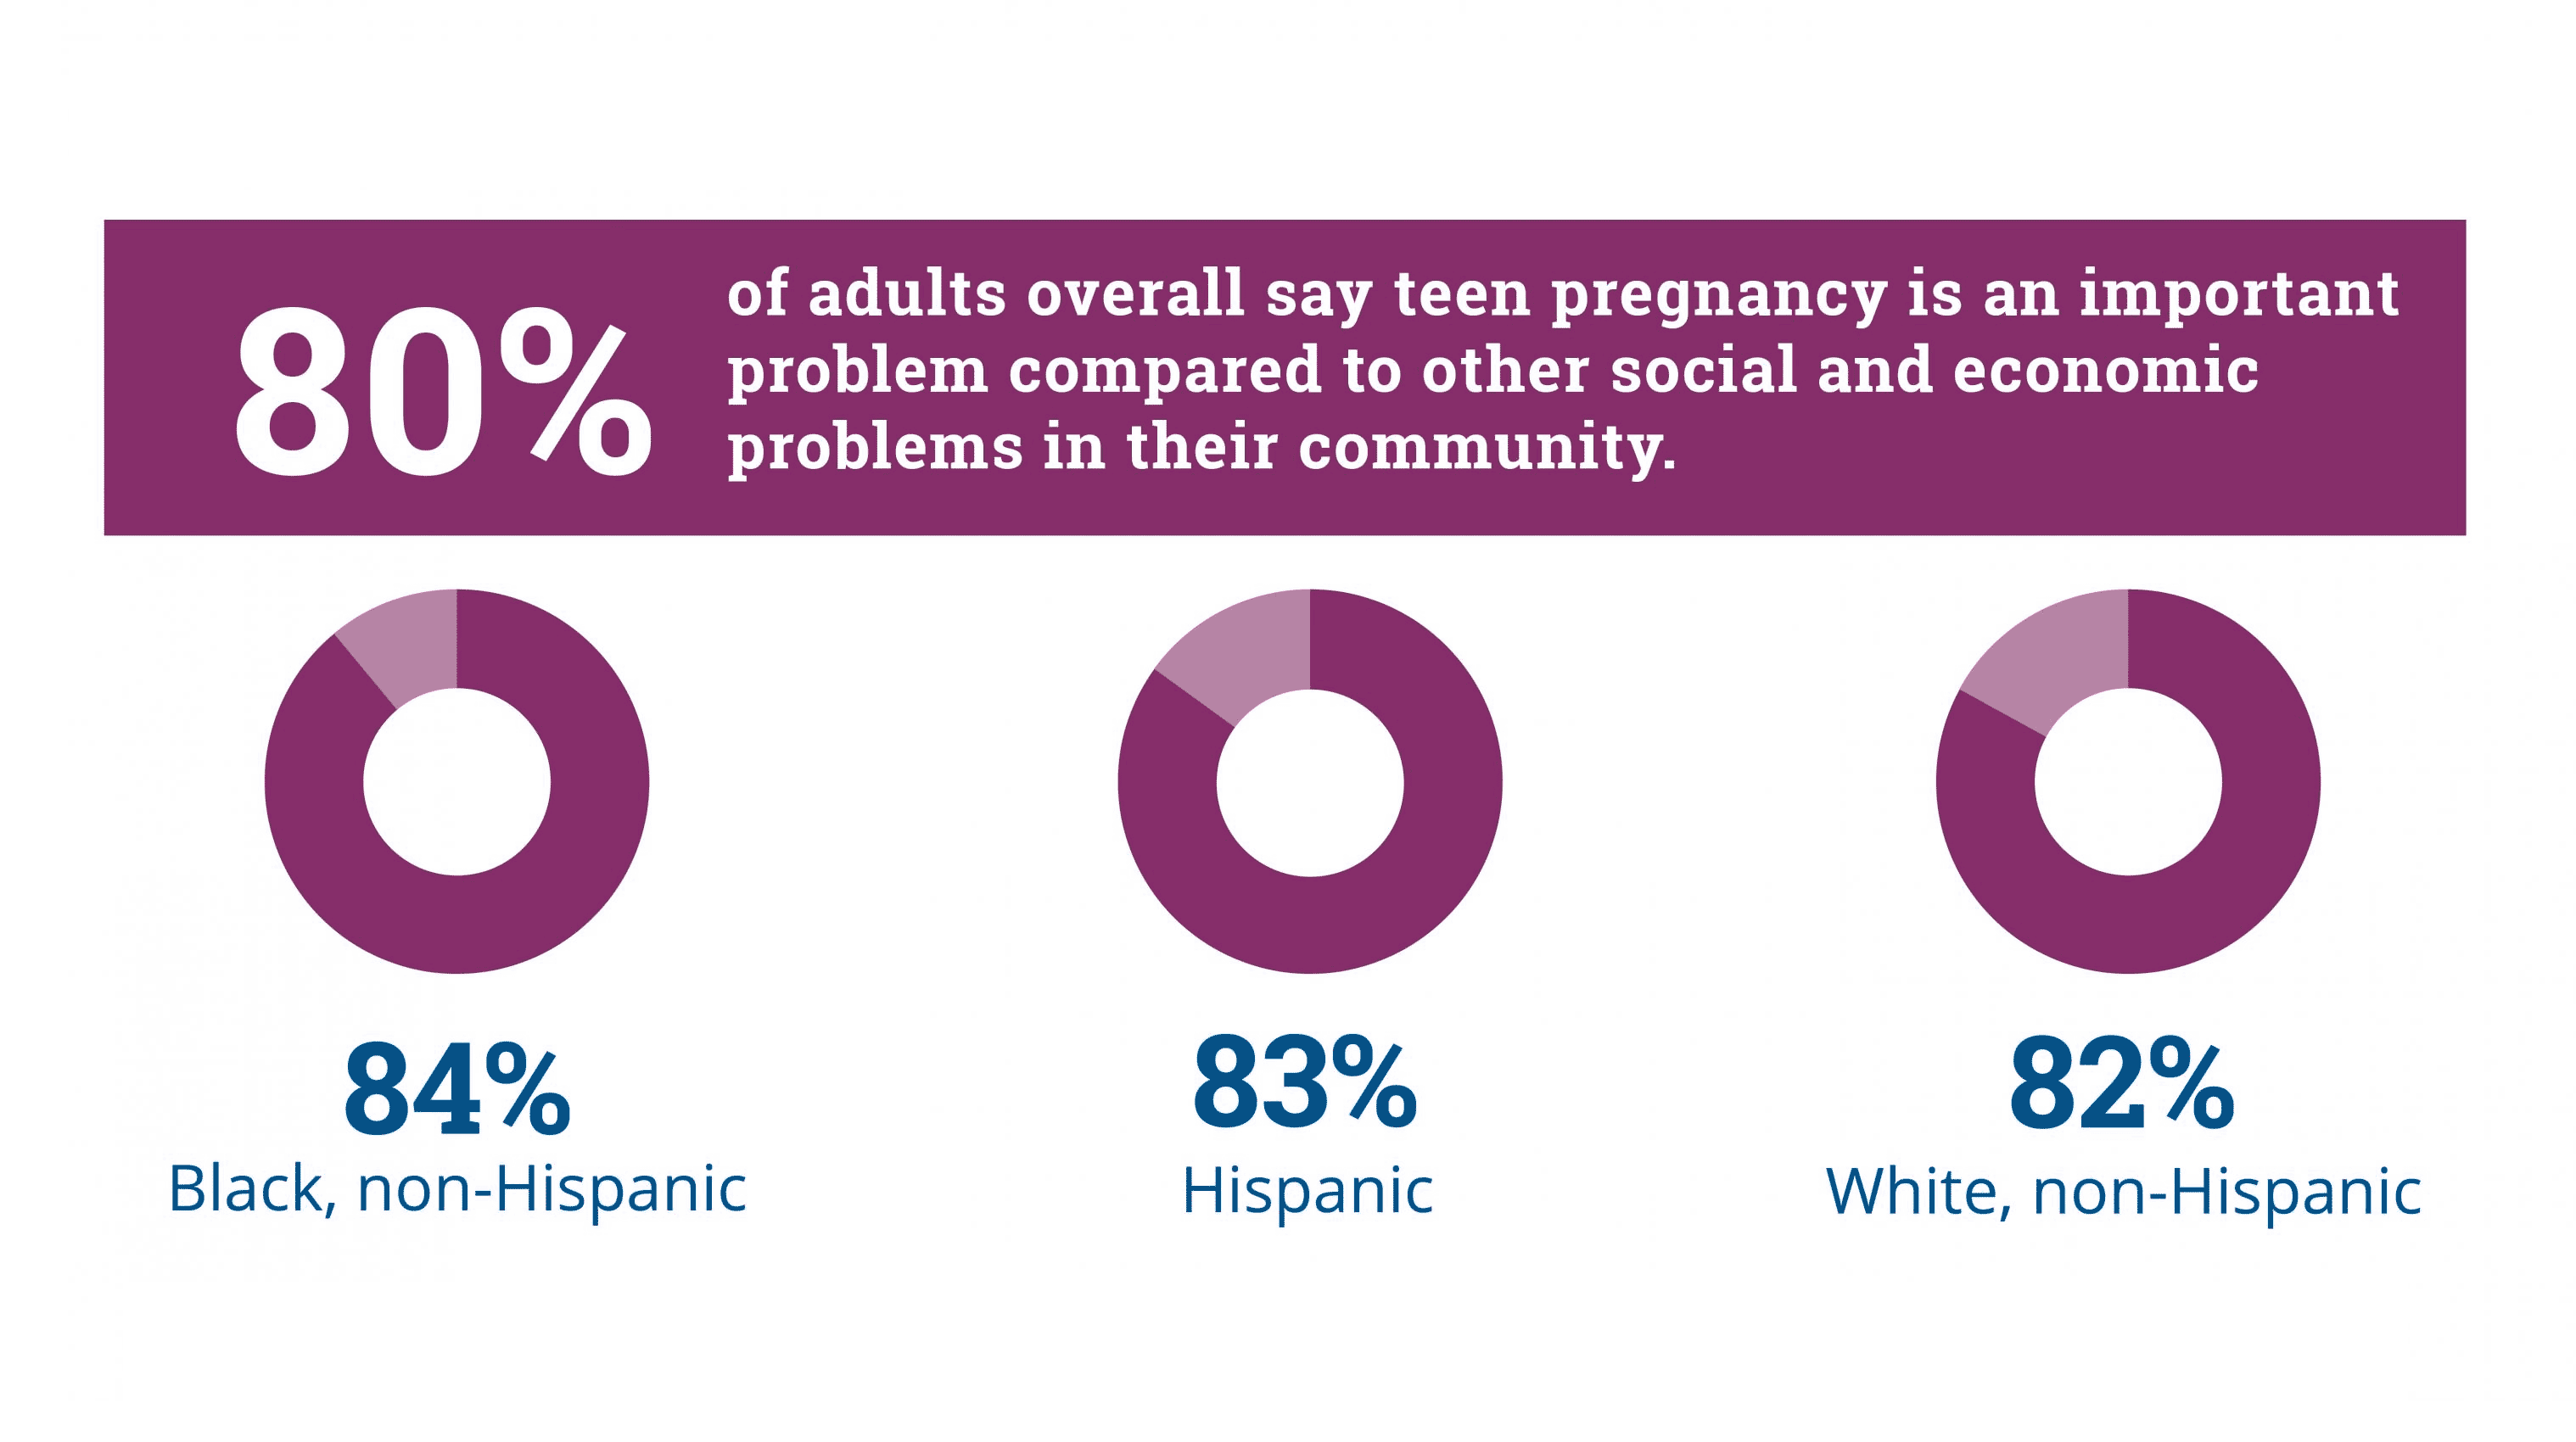 80% of adults overall say teen pregnancy is an important problem compared to other social and economic problems in their community.